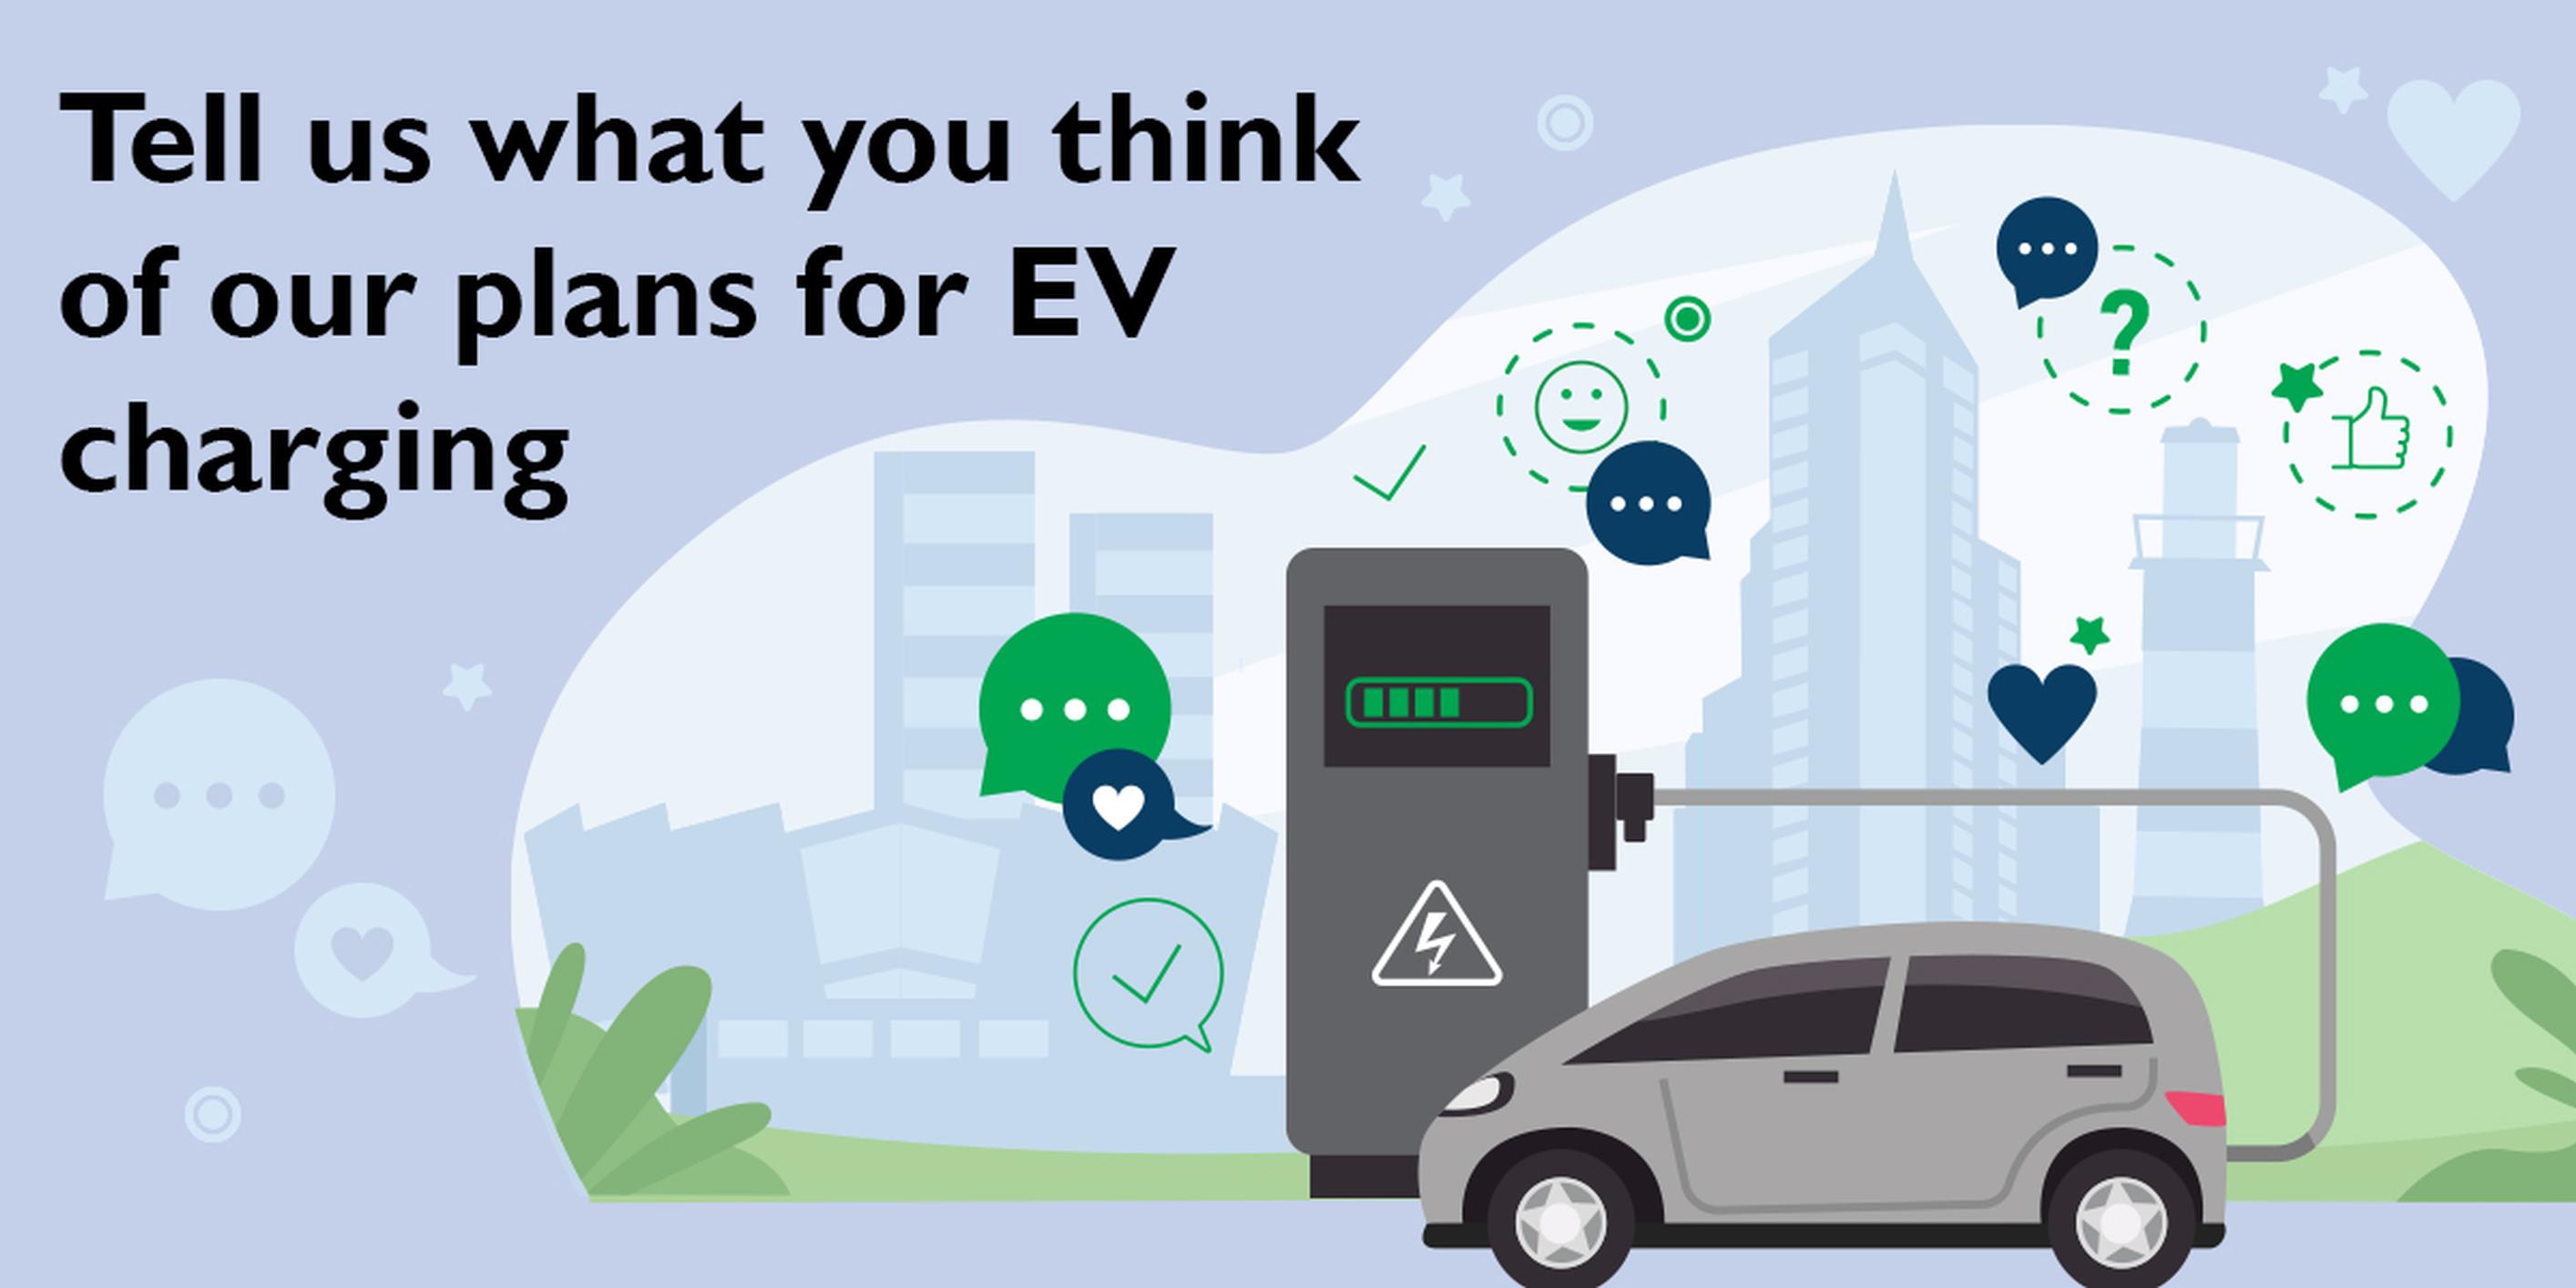 Plymouth City Council is inviting comment on its EV charging strategy